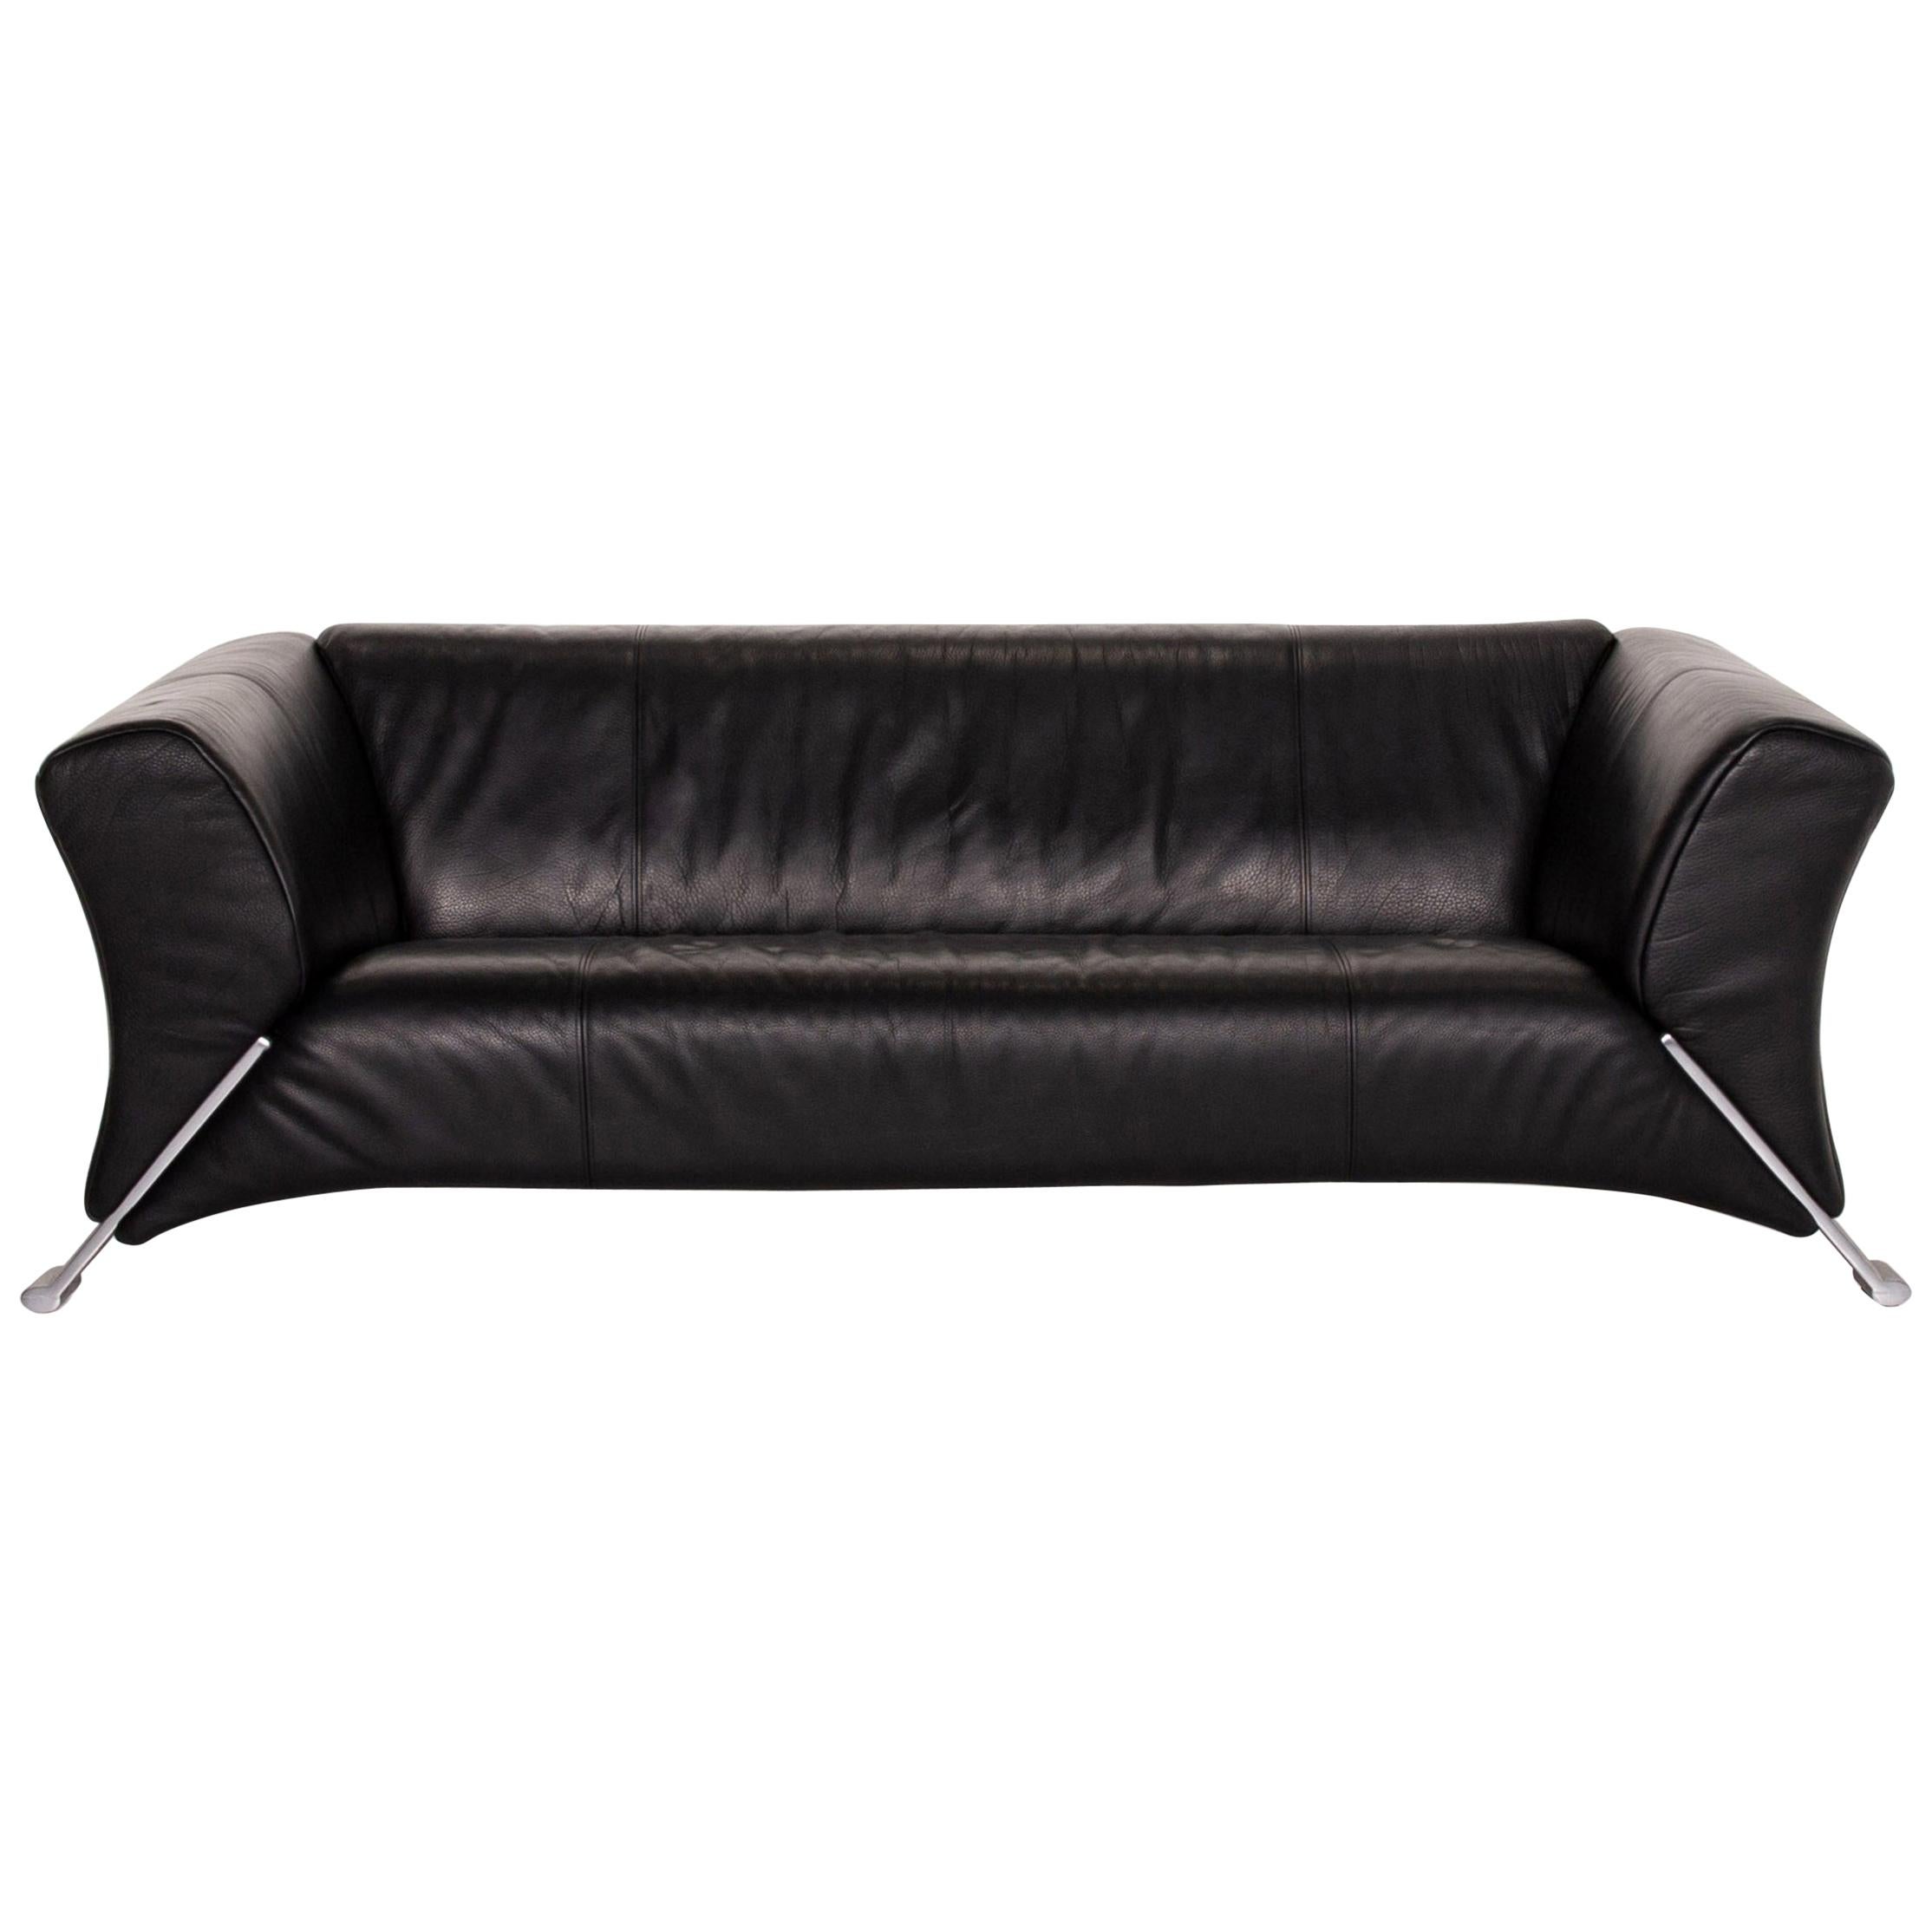 Rolf Benz 322 Leather Sofa Black Three-Seat Couch For Sale